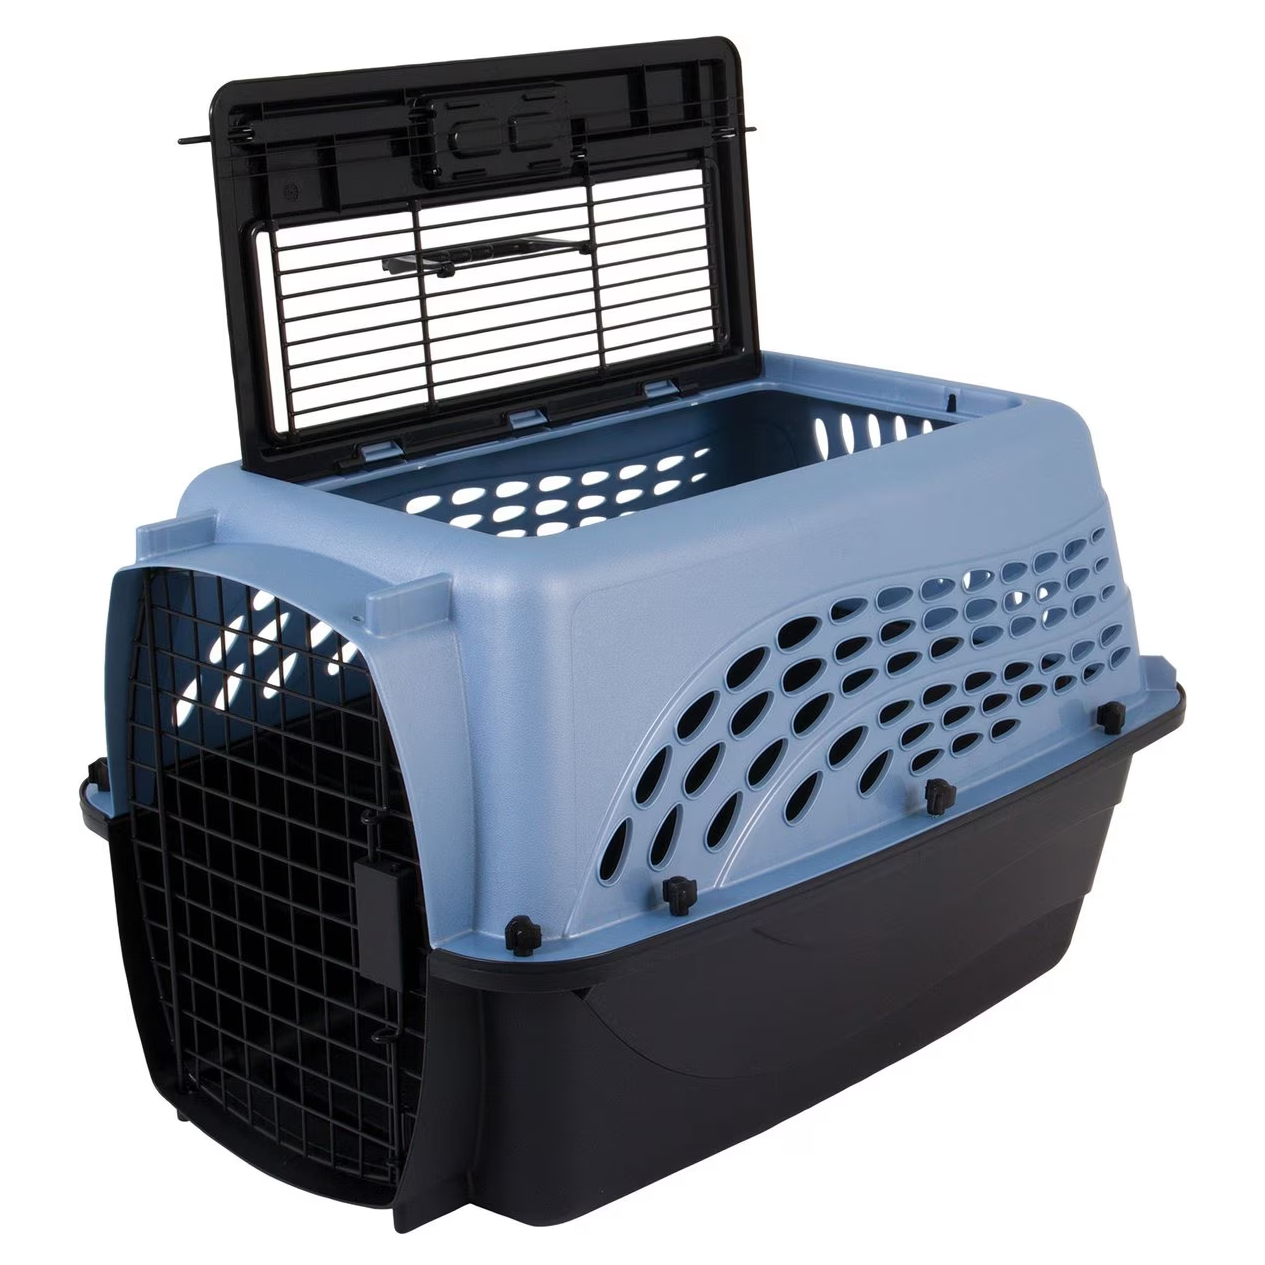 Petmate Two Door Top Load Dog and Cat Kennel